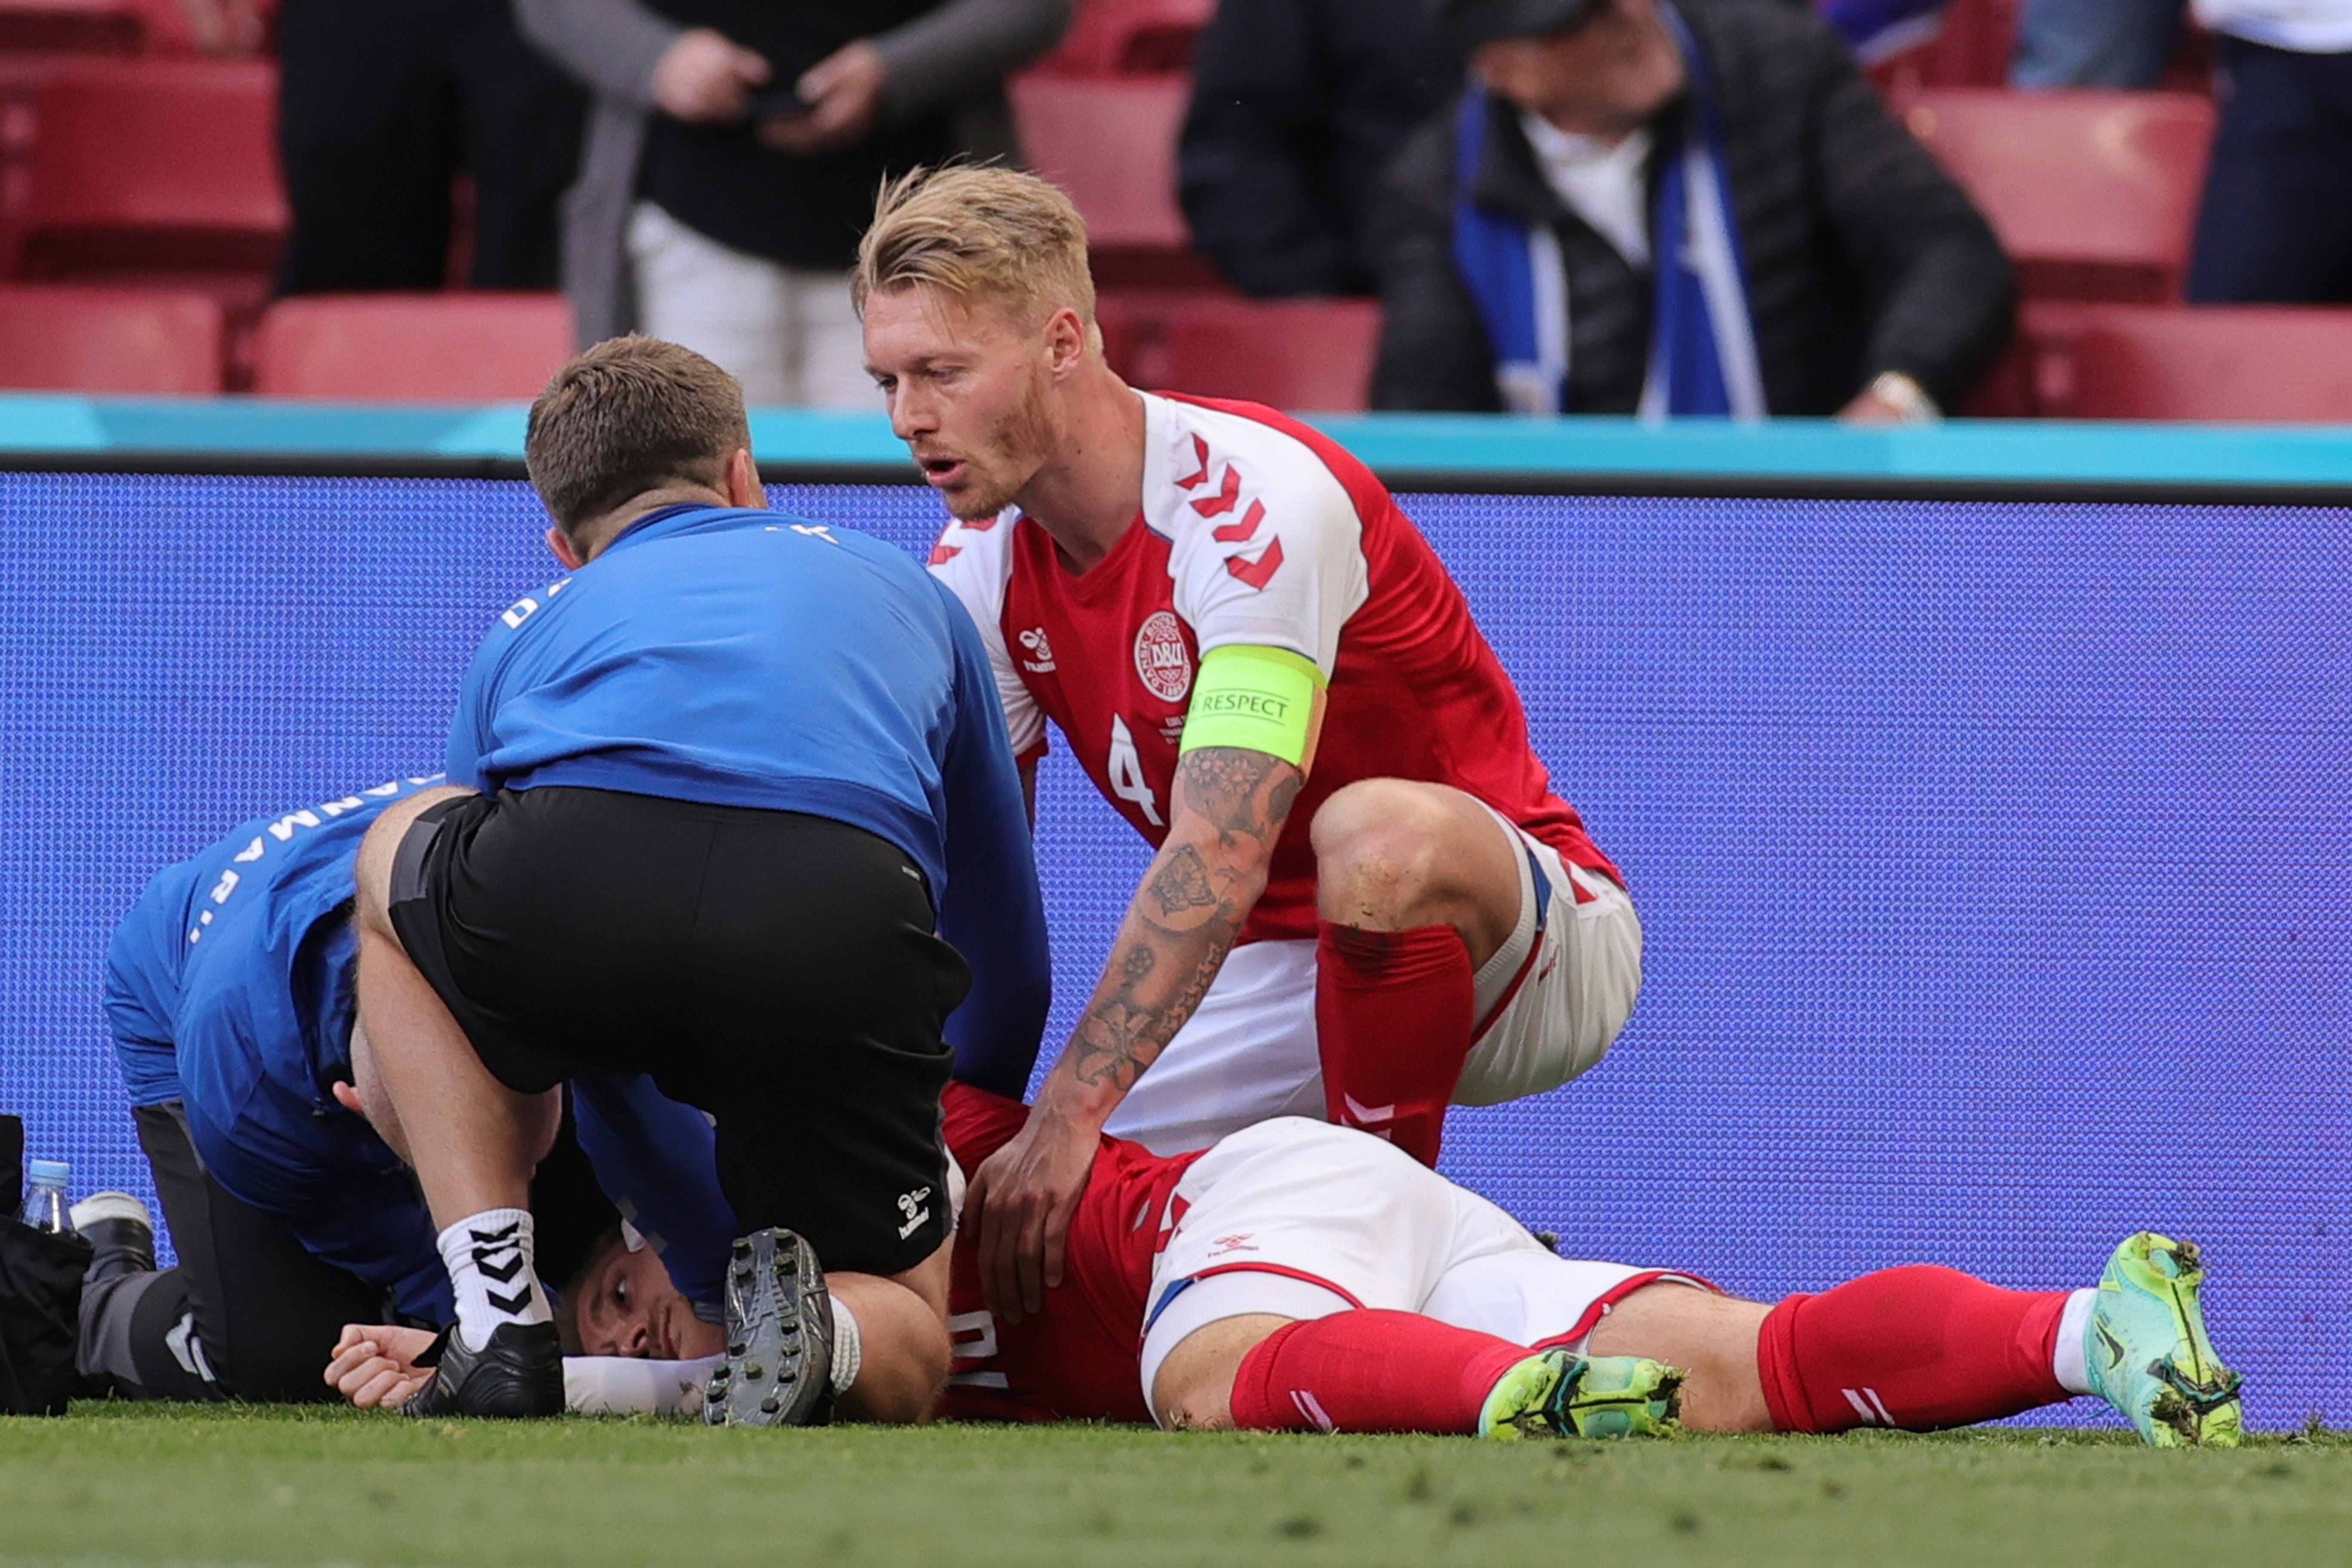 Denmark captain Simon Kjaer was among the first people to attend to Eriksen after his collapse during Euro 2020